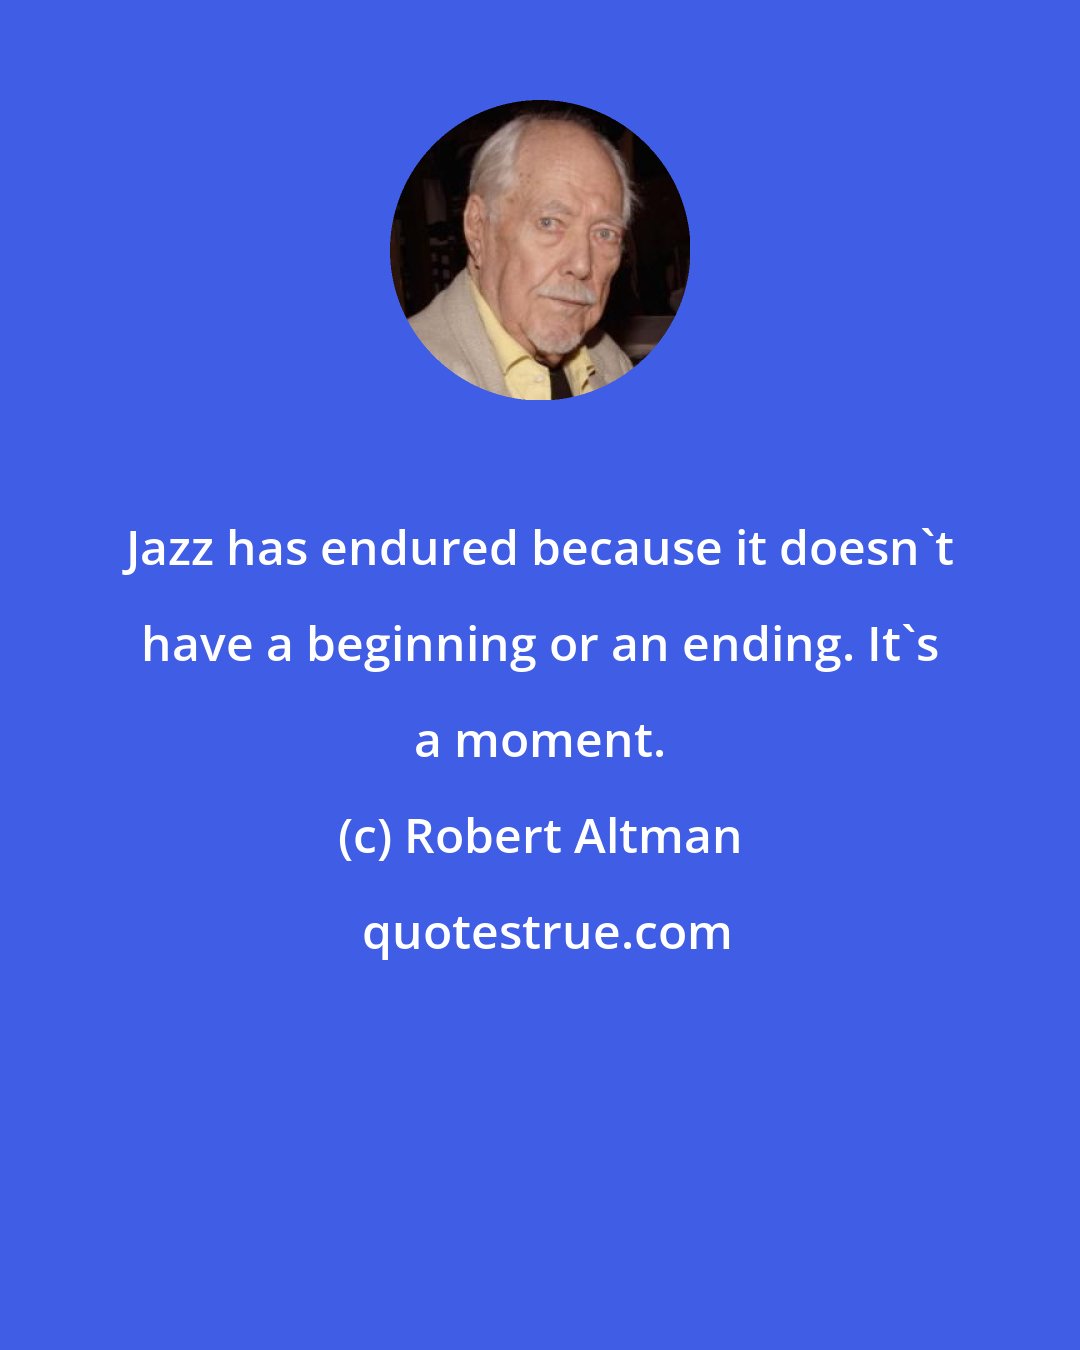 Robert Altman: Jazz has endured because it doesn't have a beginning or an ending. It's a moment.